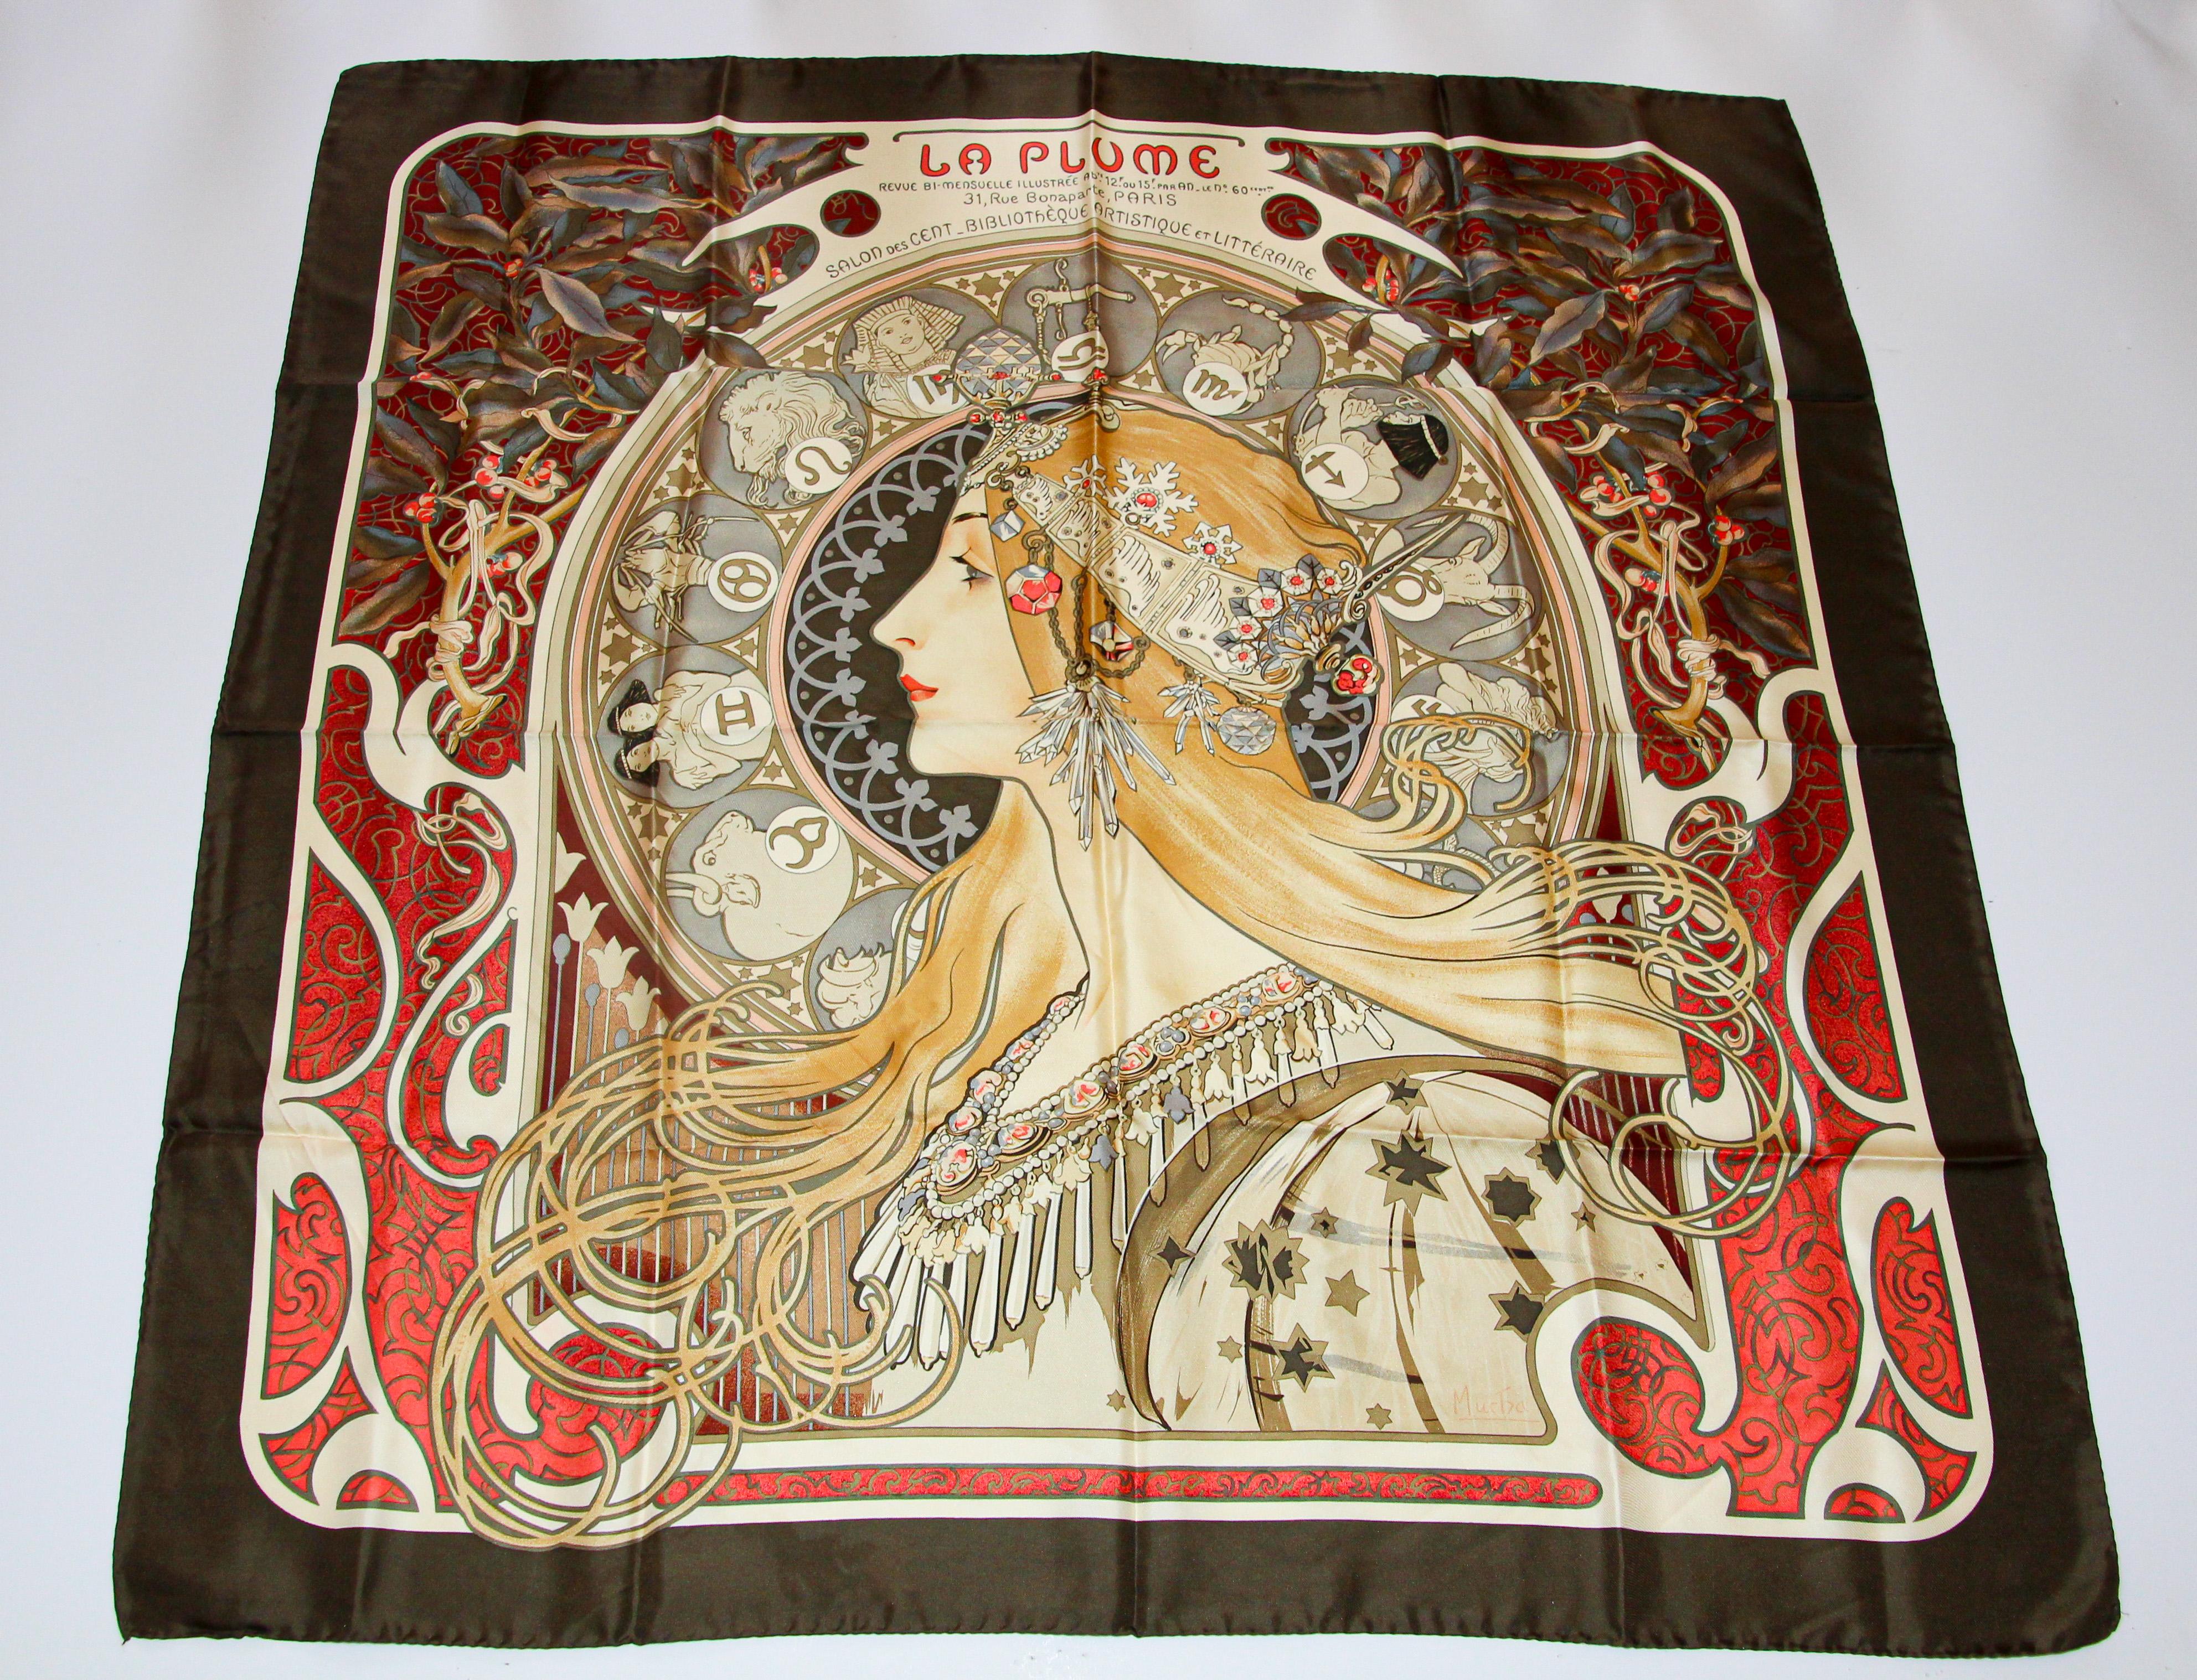 Gorgeous silk scarf in mint pristine condition.
Alphonse Mucha Art Nouveau Zodiac La Plume Silk Scarf.
Silk twill scarf with Art Nouveau image after Alphonse Mucha’s La Plume. 
The scarf features an image of a woman with long blonde hair with a